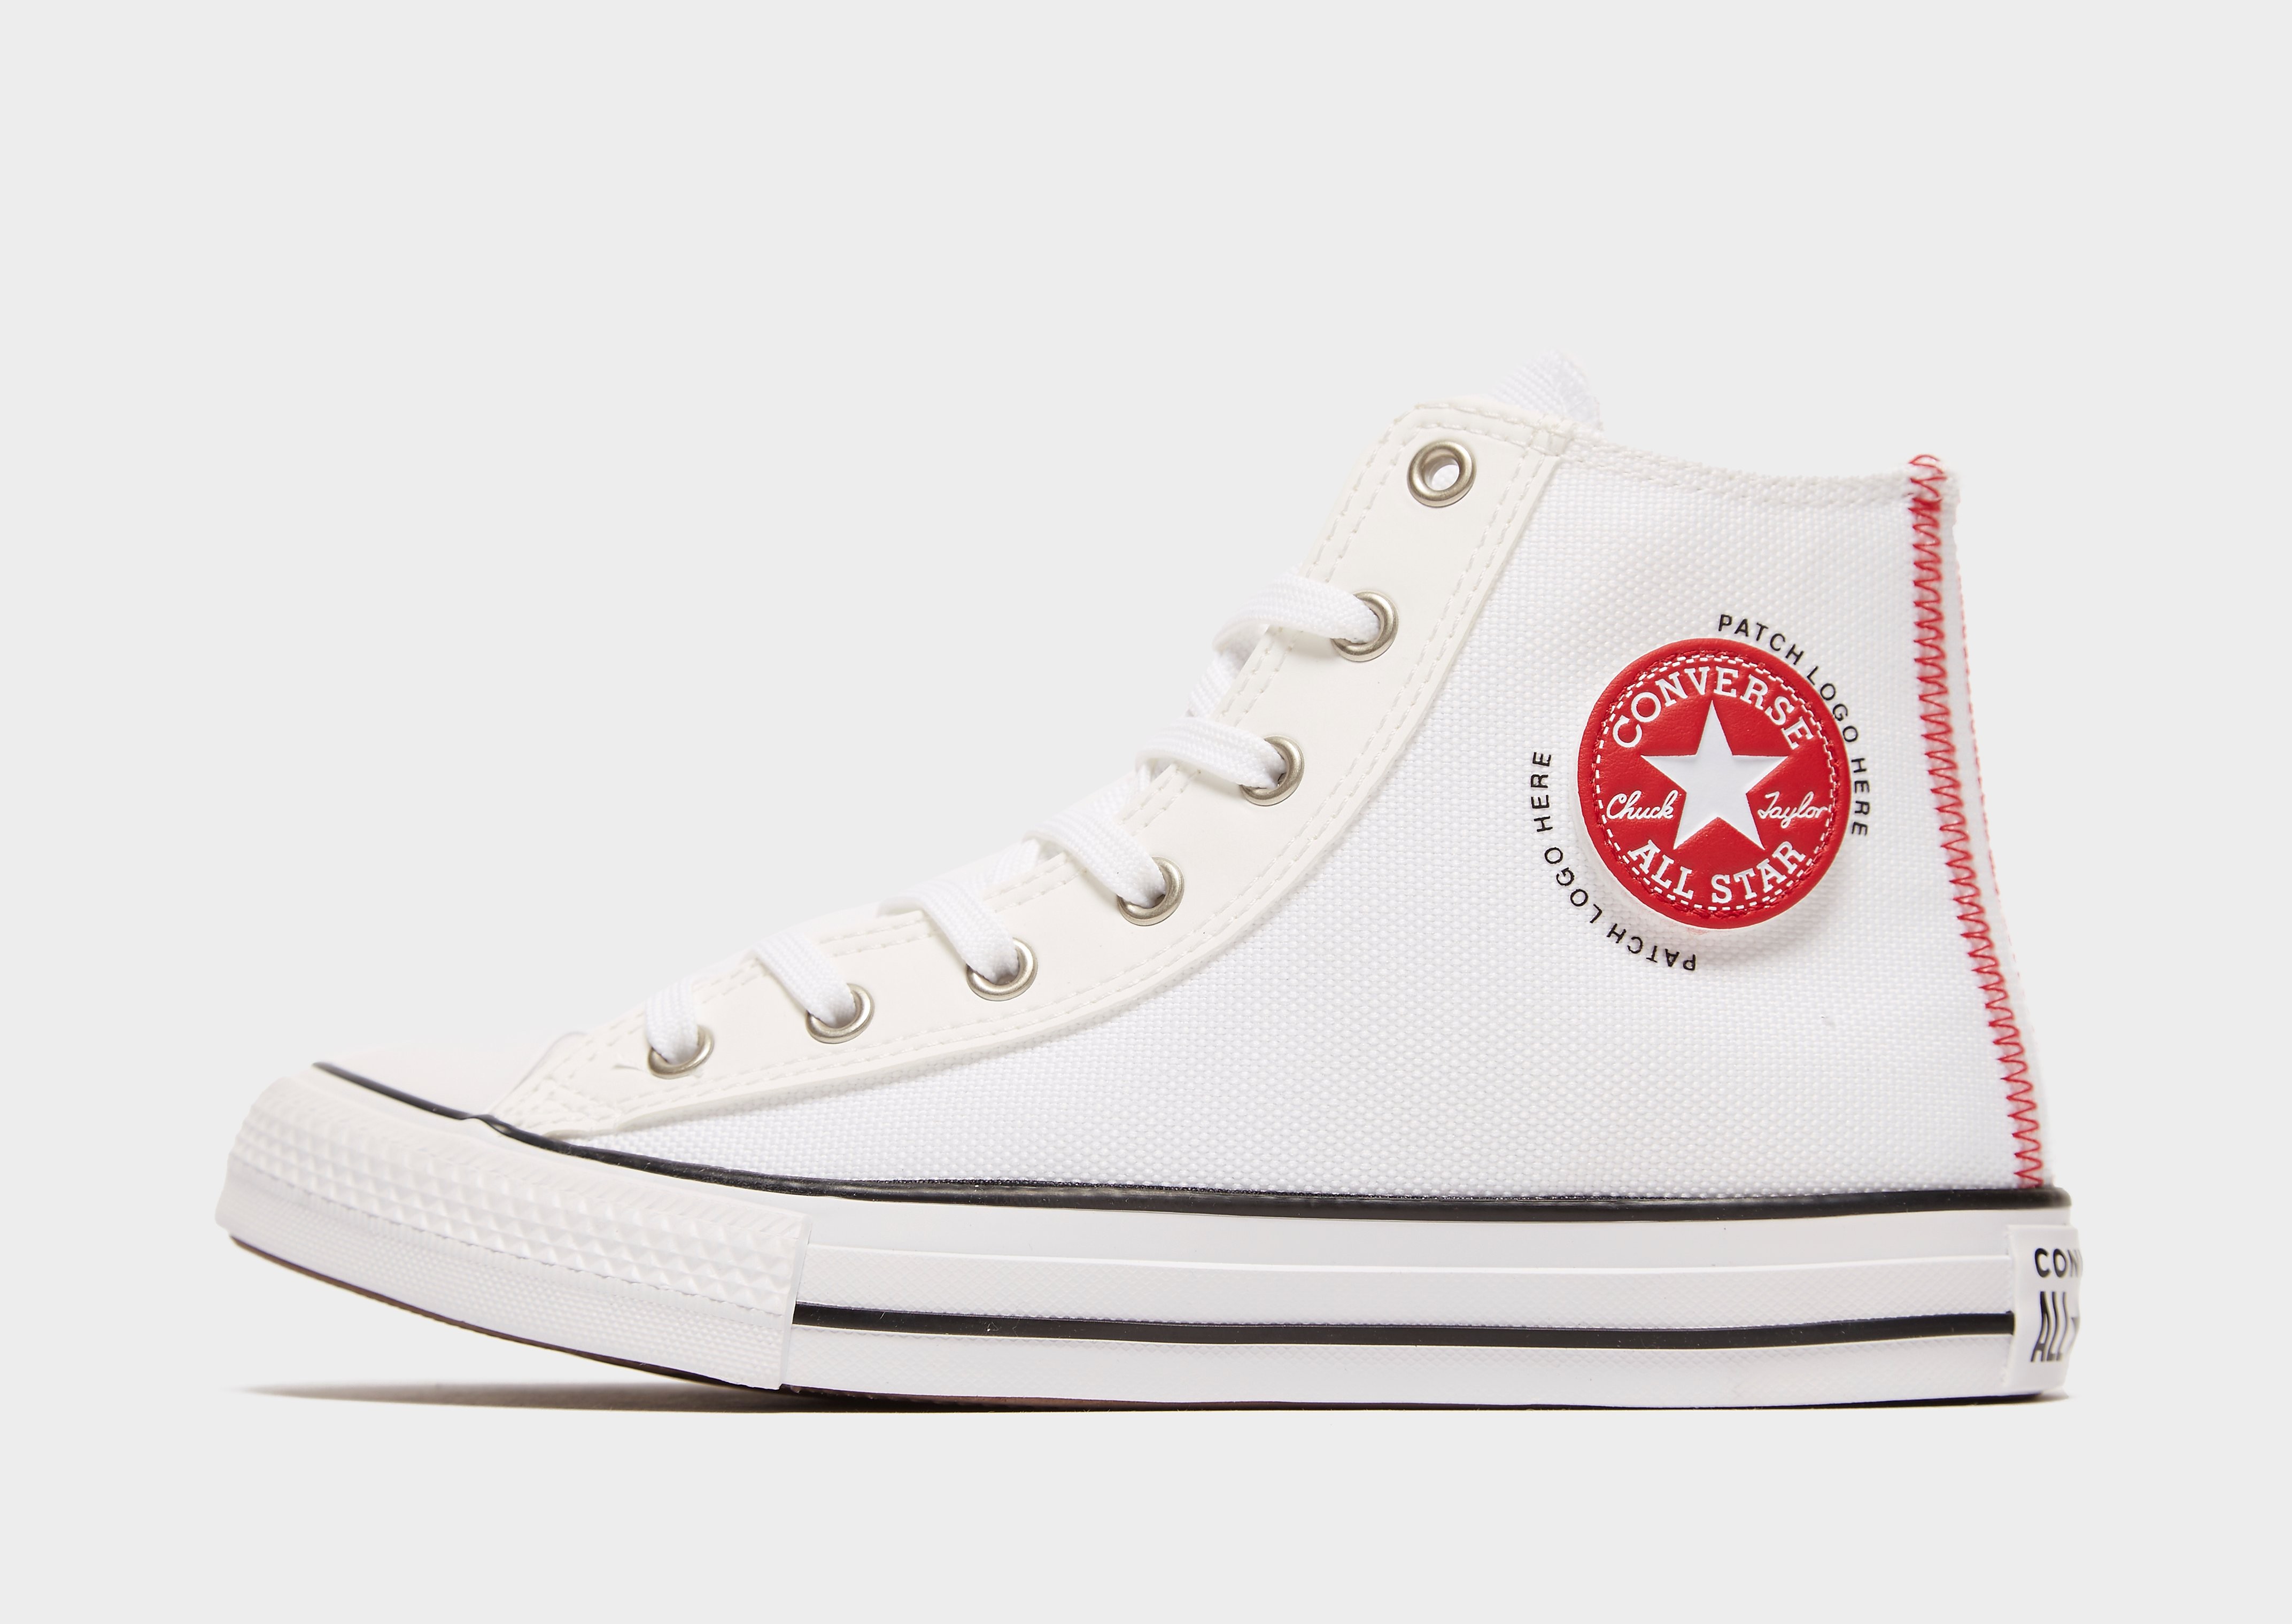 Converse Chuck Taylor All Star High Junior - White/Red - Kids, White/Red